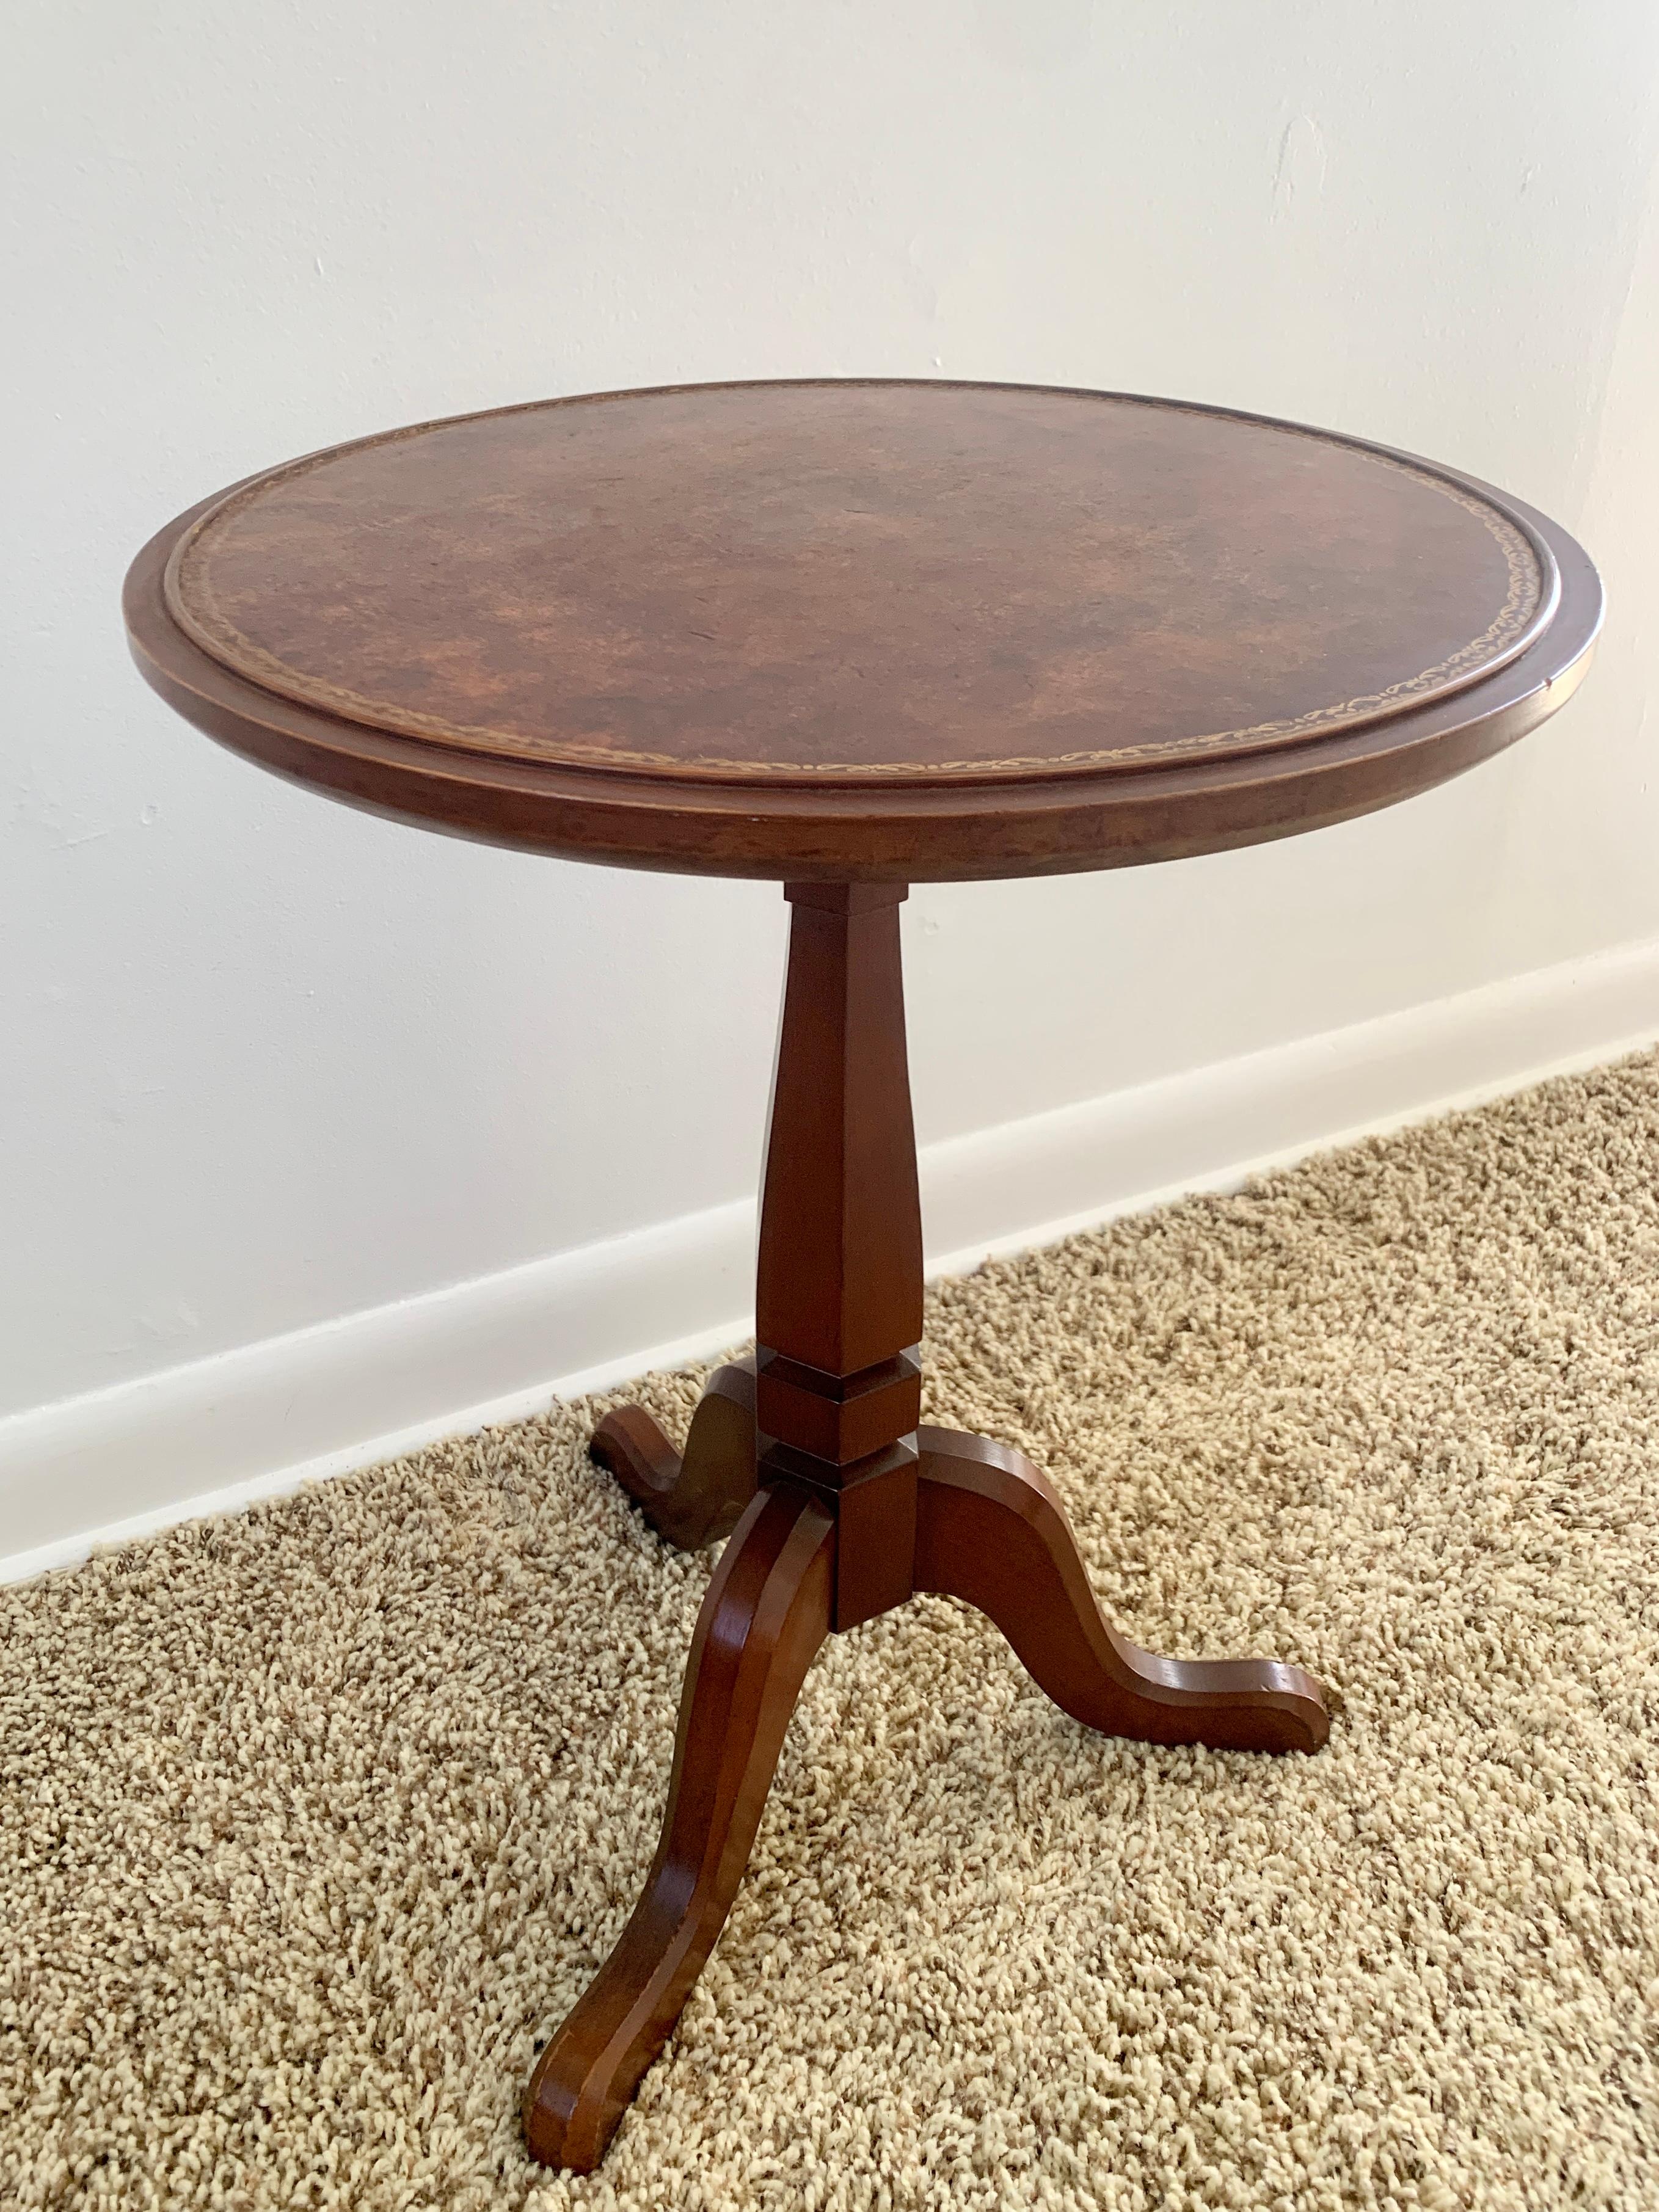 Vintage Georgian Embossed Leather Top Cherry Wood Round Side Table For Sale 1